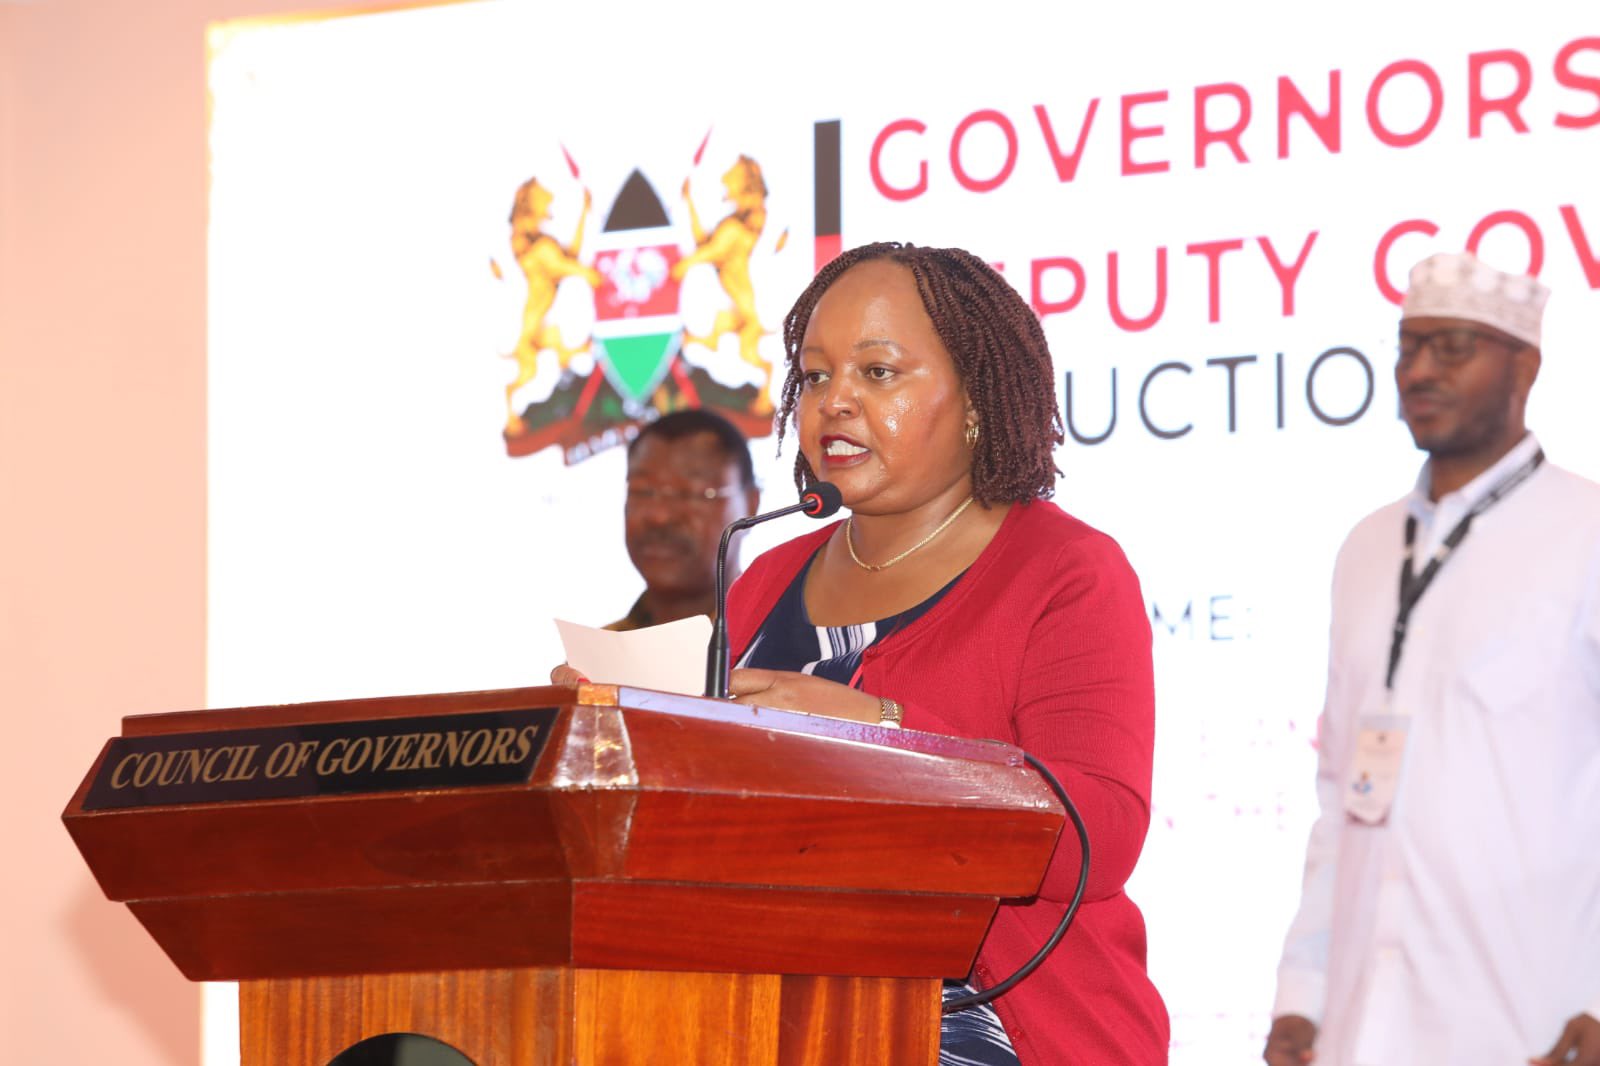 File image of Council of Governors chairperson Anne Waiguru.